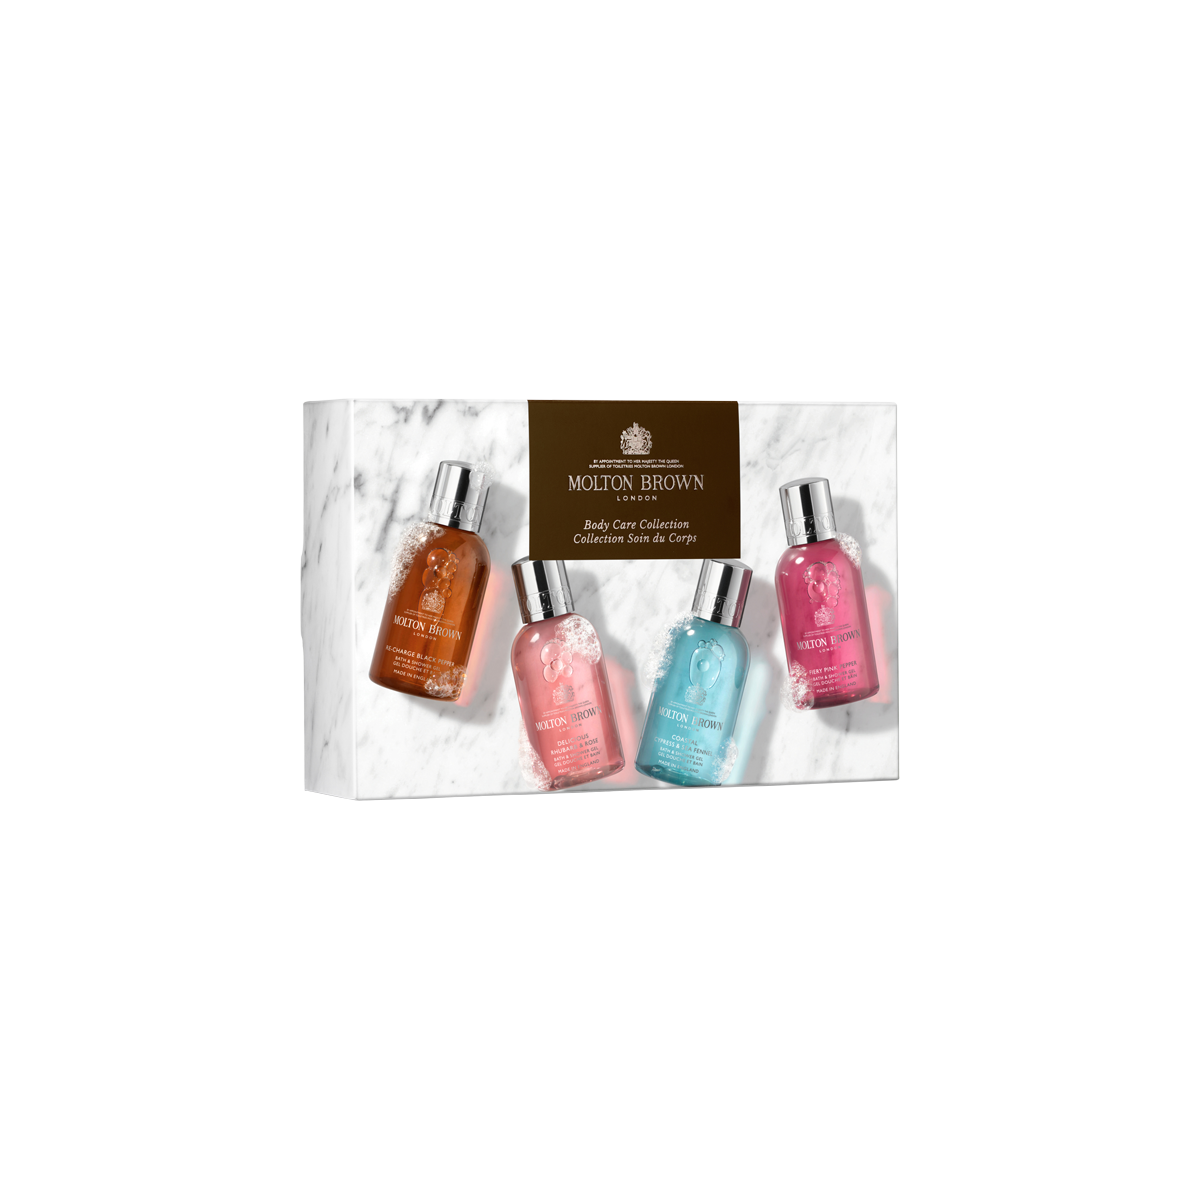 Molton Brown - Woody & Floral Body Care Collection